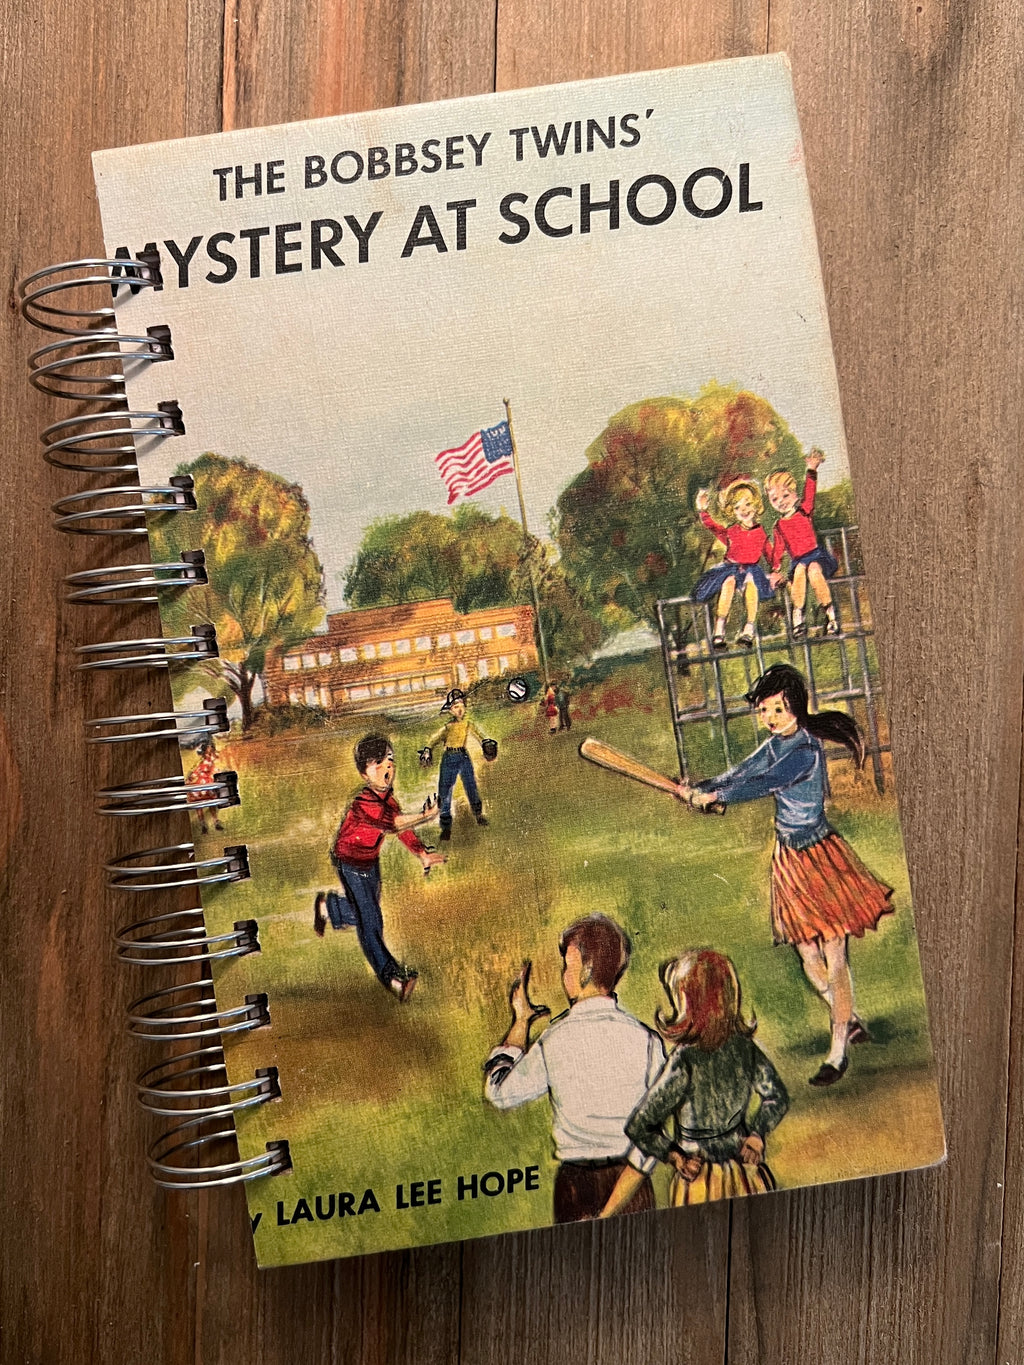 The Bobbsey Twins' Mystery at School